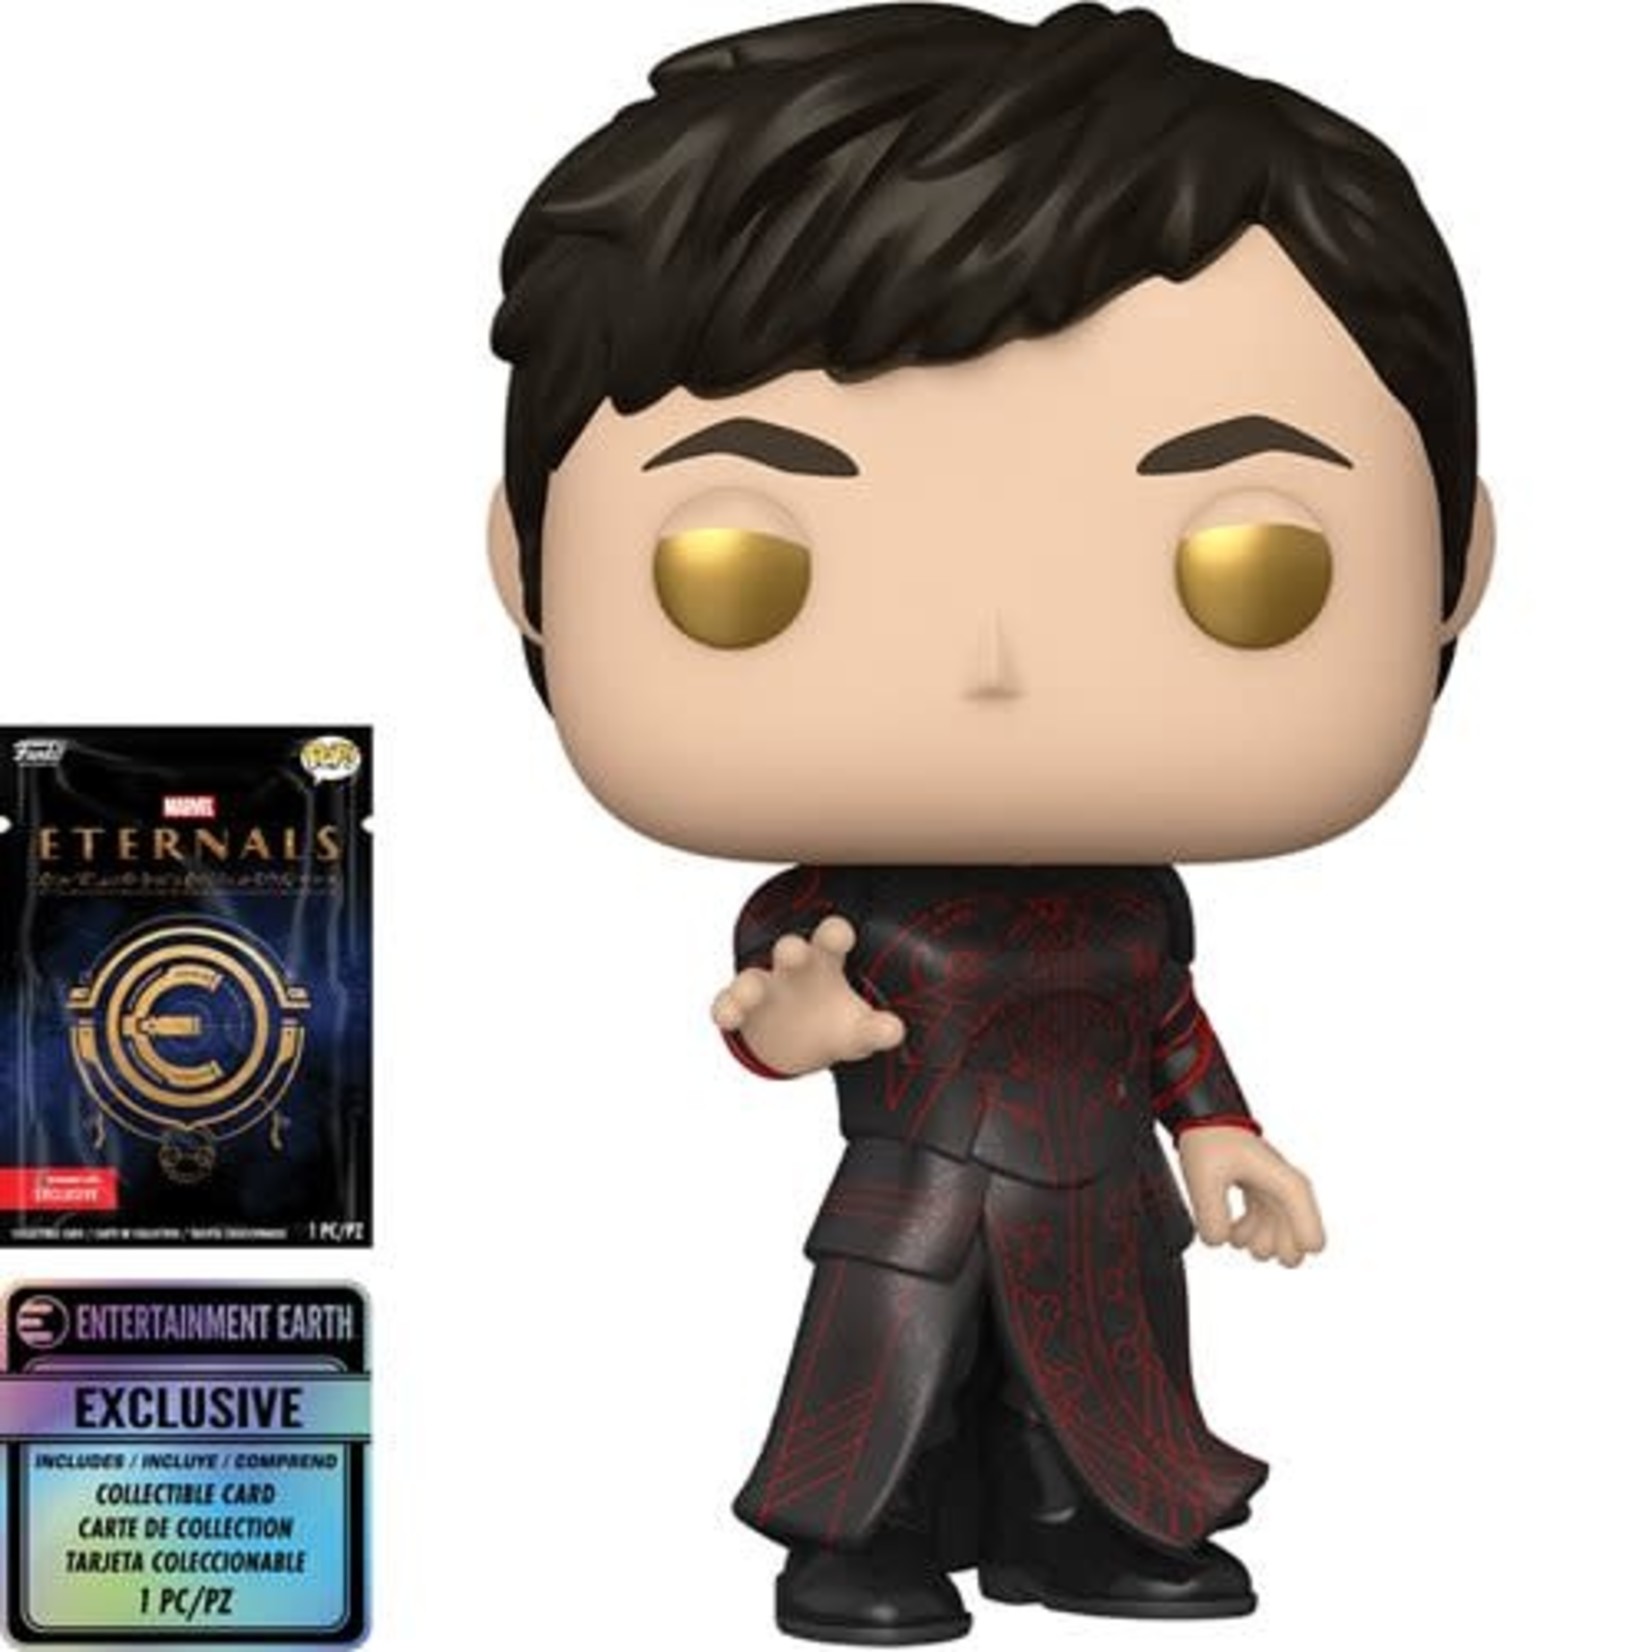 Funko Eternals Druig Pop! Vinyl Figure with Collectible Card - Entertainment Earth Exclusive